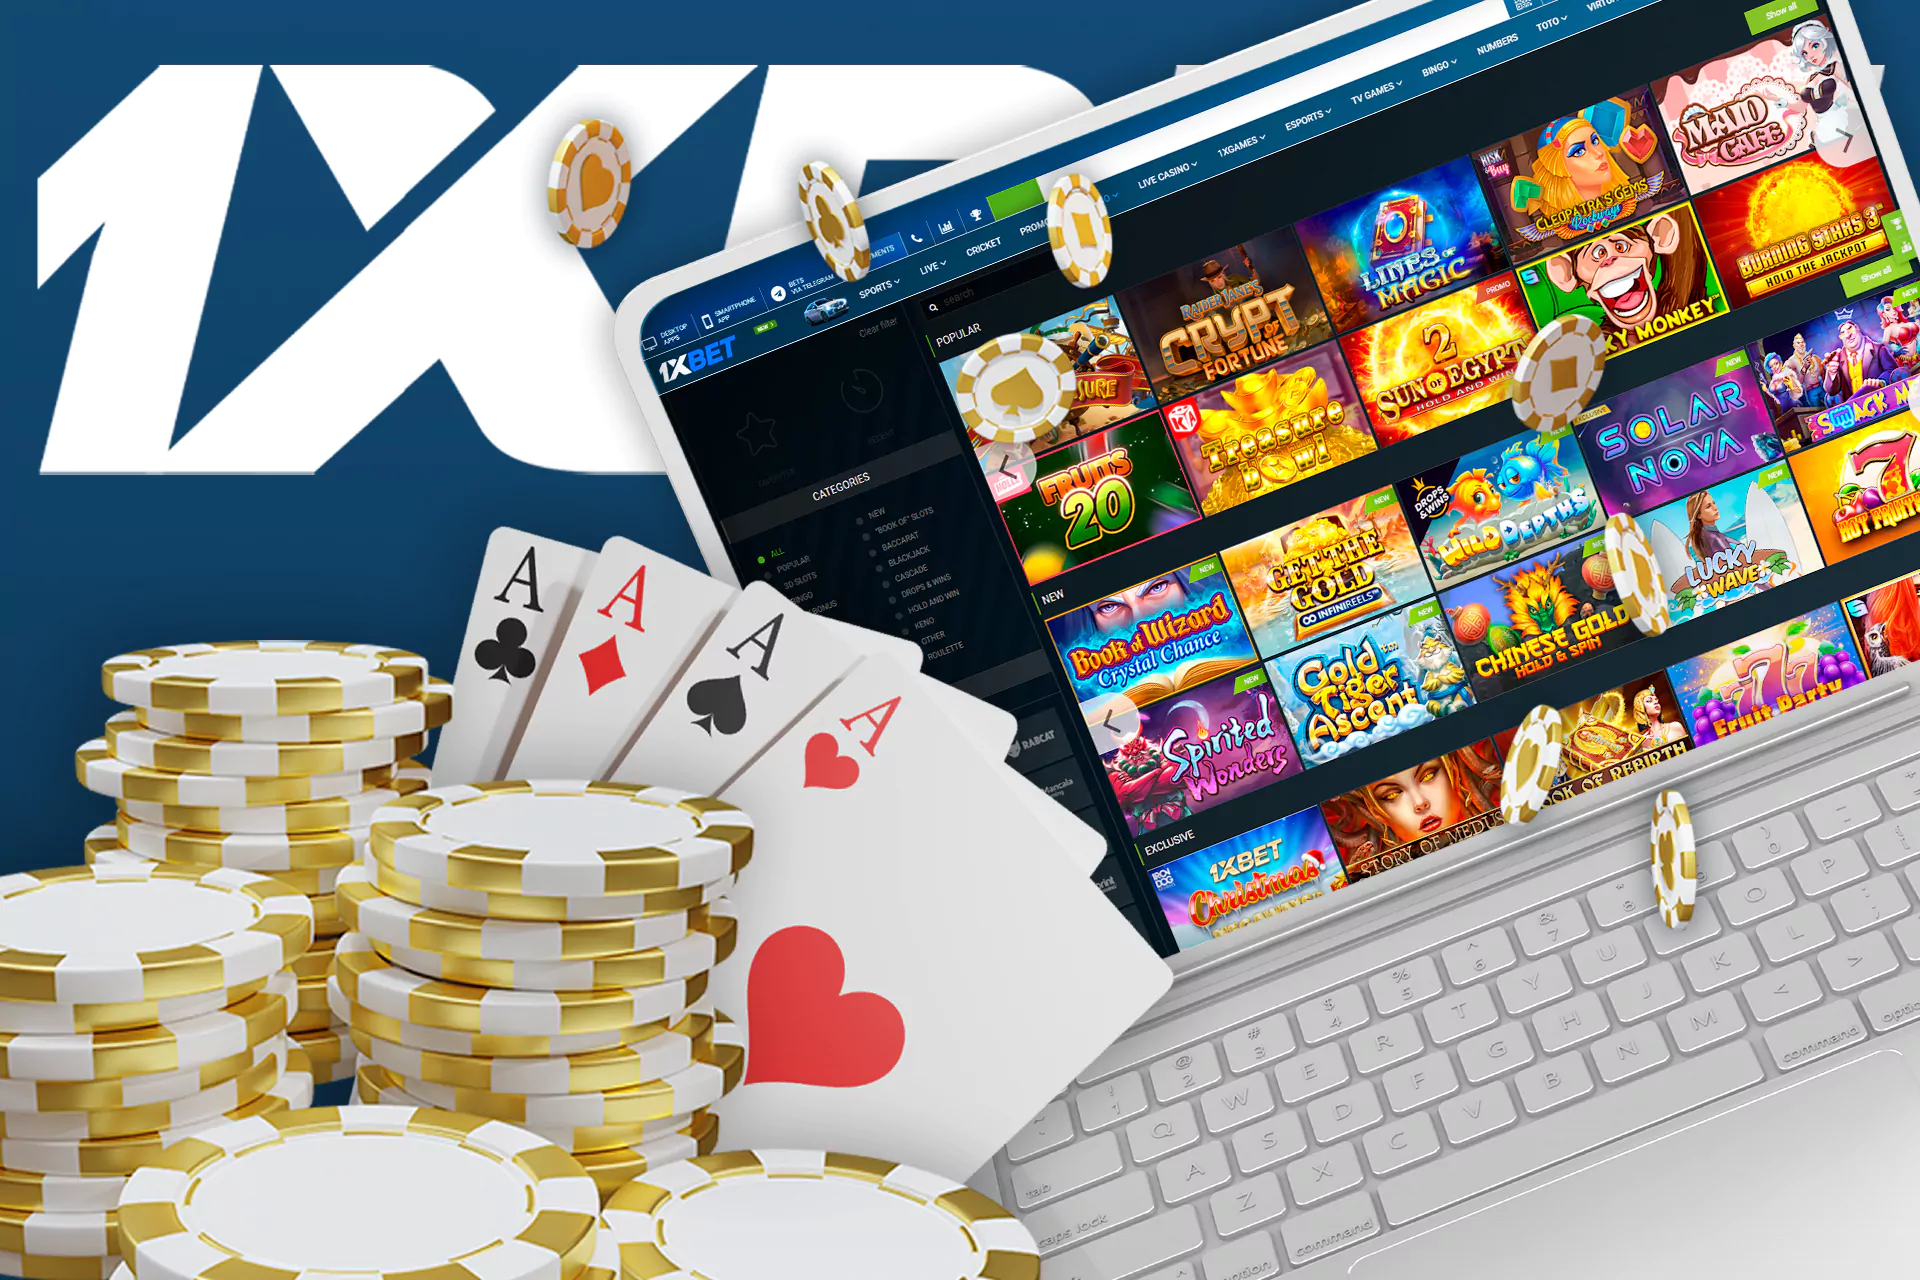 1xBet has also got its own casino with lots of slots and card games with live dealers.